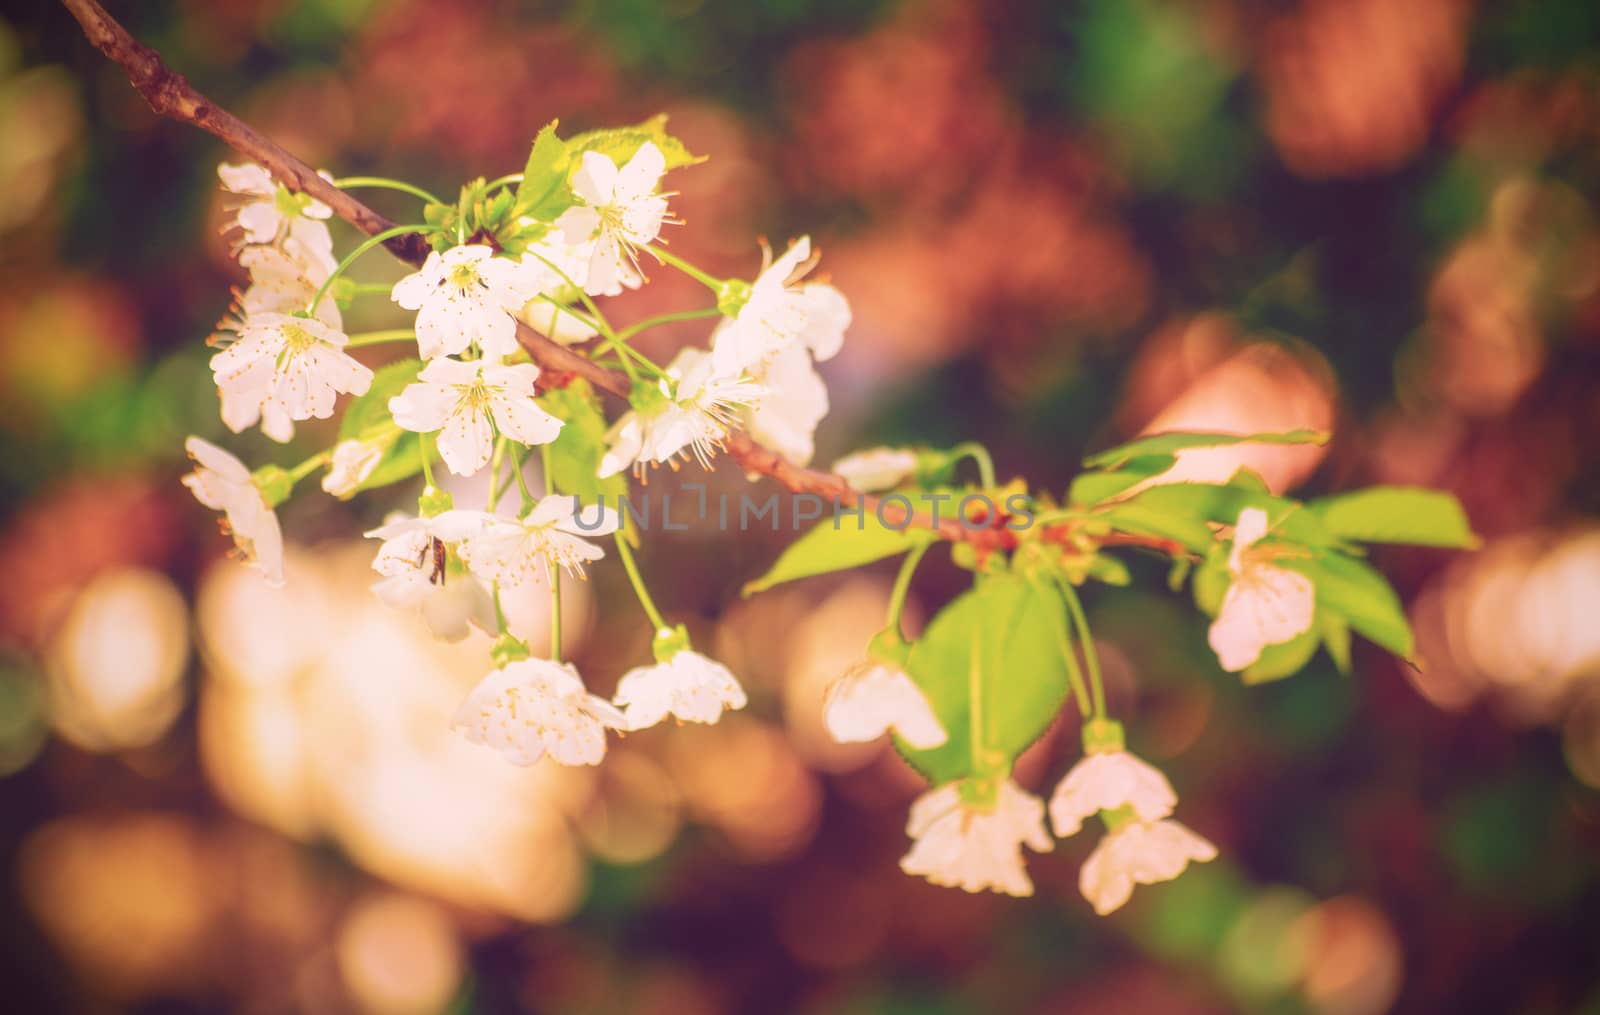 Magical bokeh close up of a blooming sweet cherry tree by Mendelex